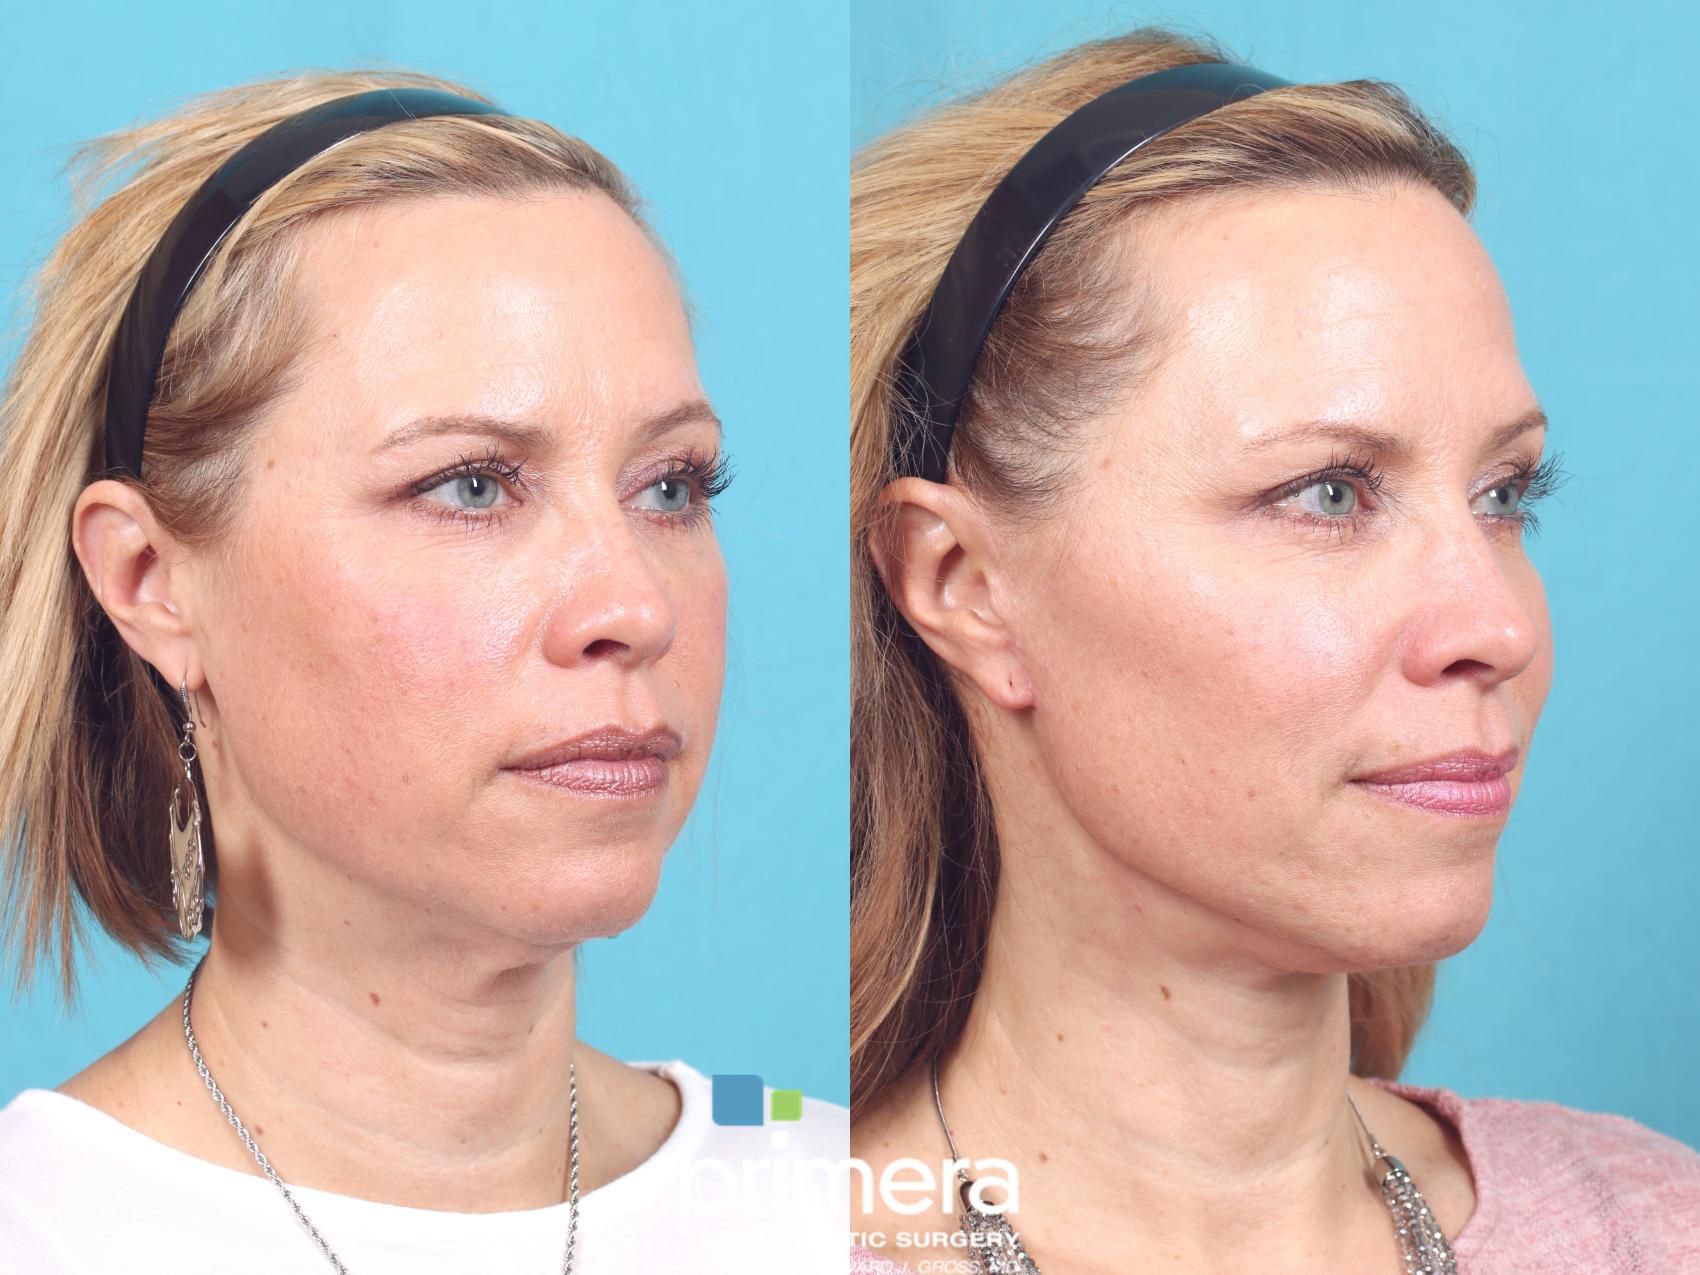 3 Ways to Slim Your Face (Non-Surgically) - Skin NV Tampa Med Spa